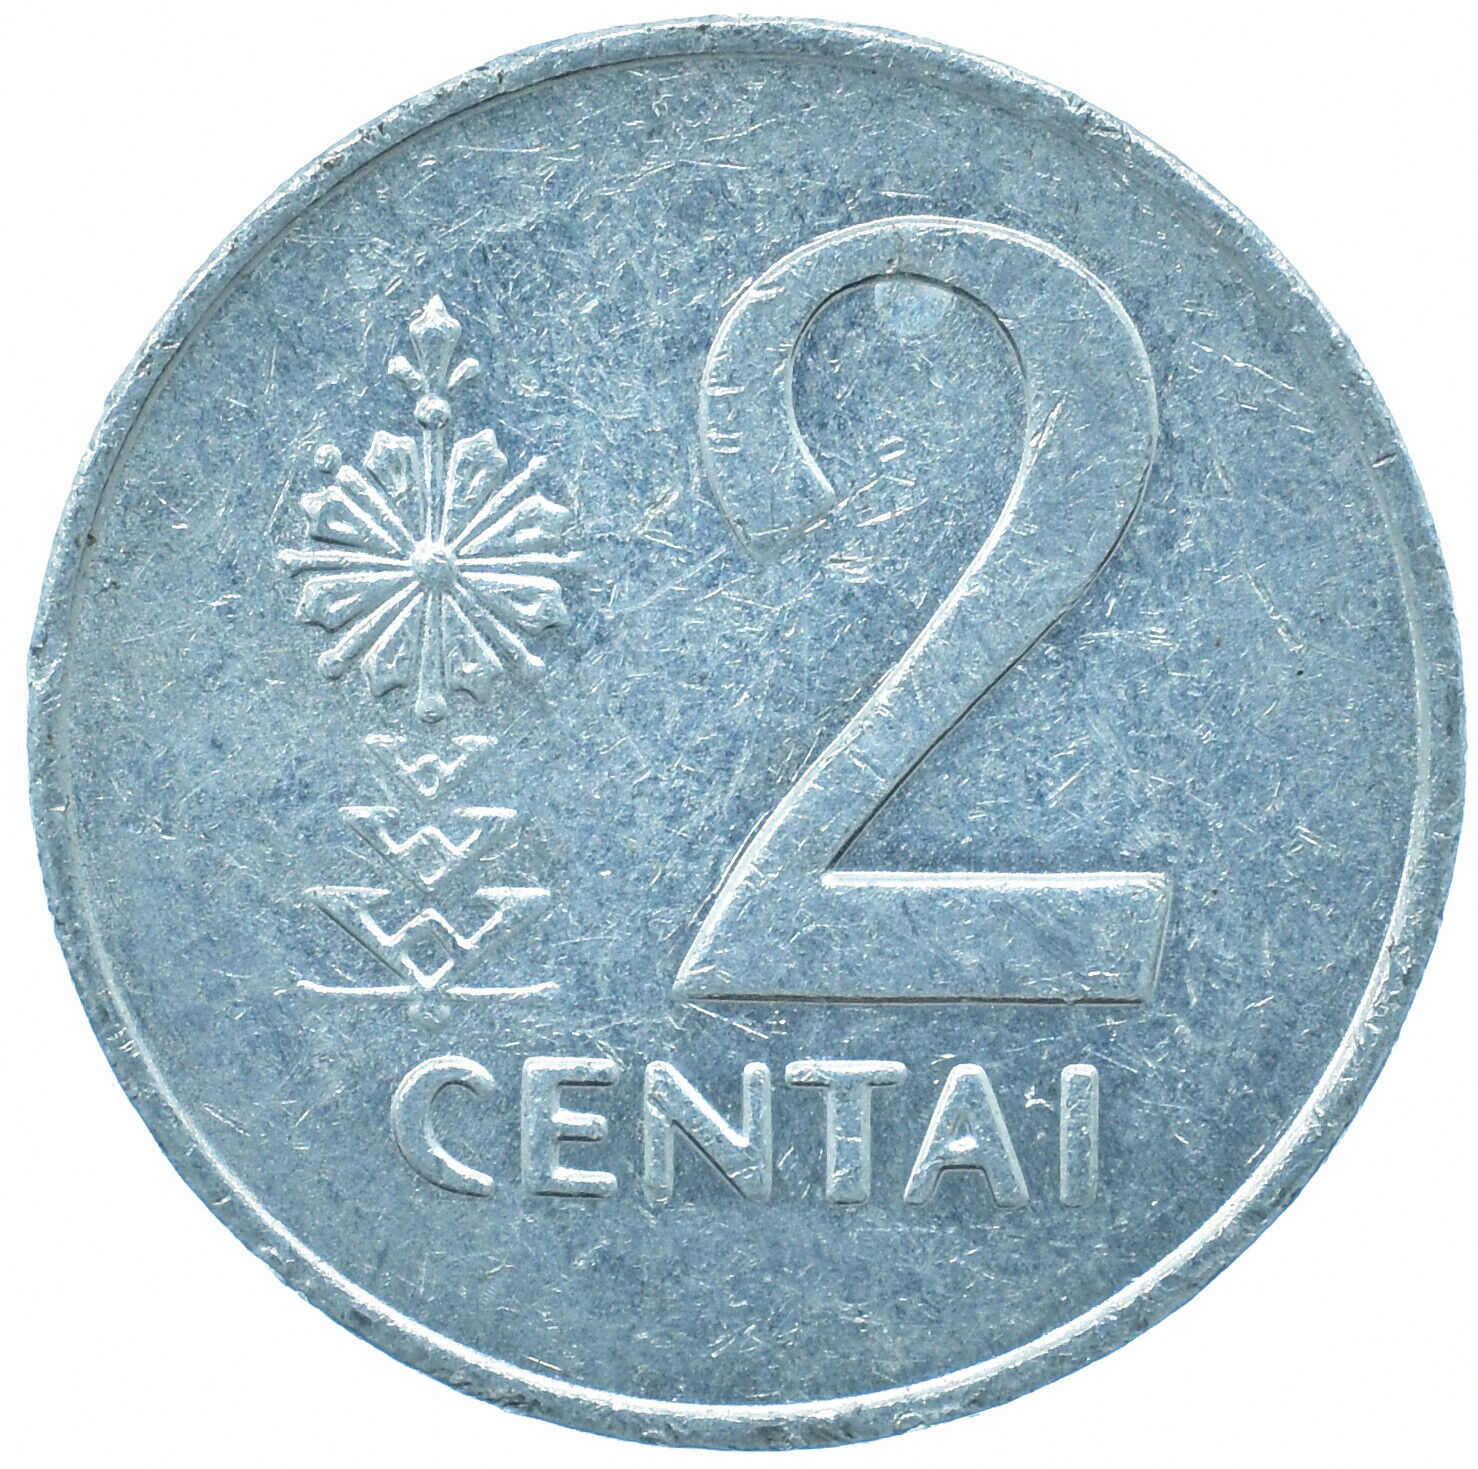 LITHUANIA LIETUVA Ranking TOP4 Max 59% OFF 2 CENTAI 1991 COIN COLLECTIBLE BEAUTIFUL